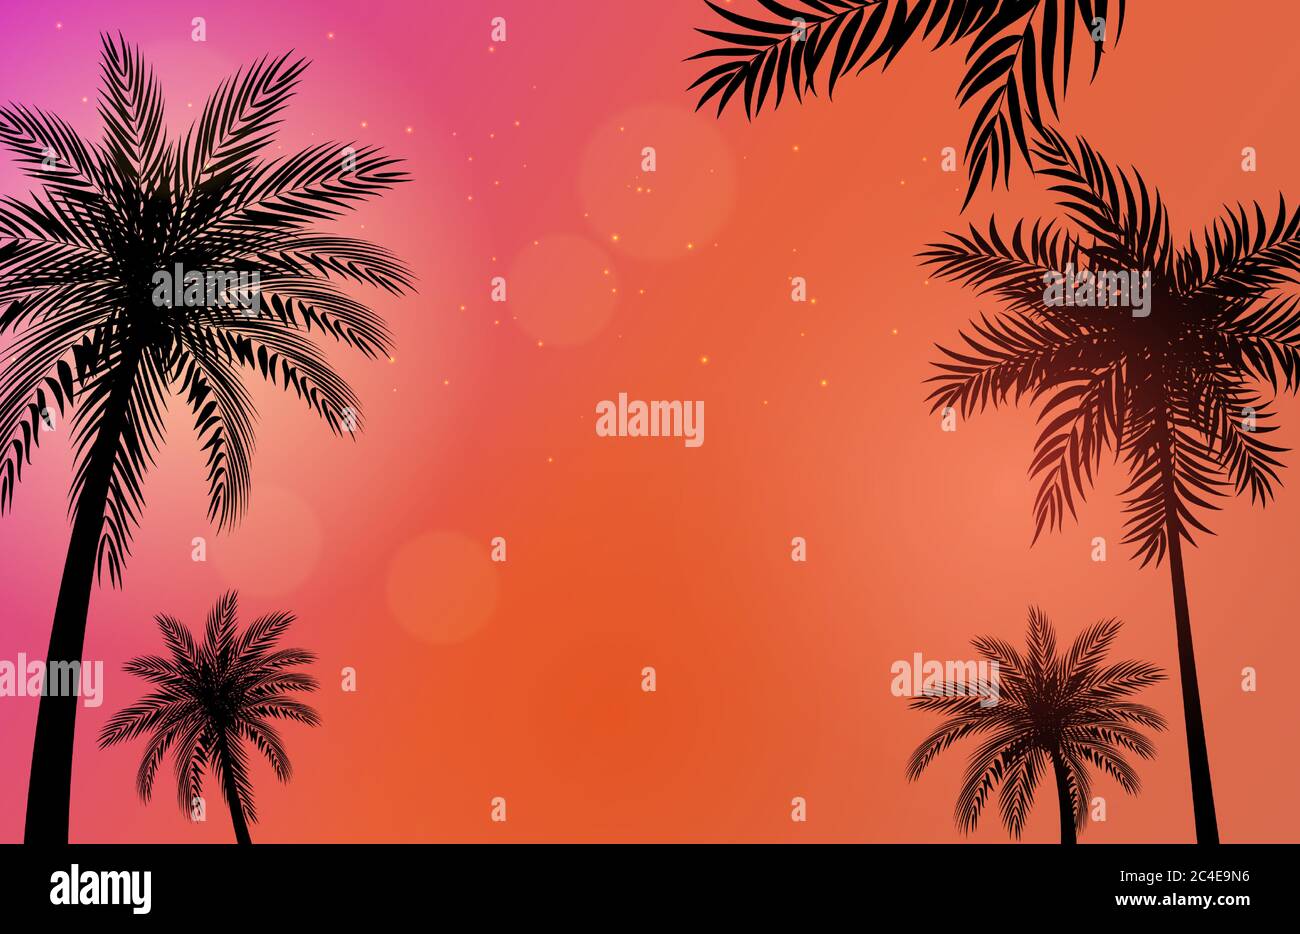 Beautifil Palm Trees background Vector Illustration Stock Vector